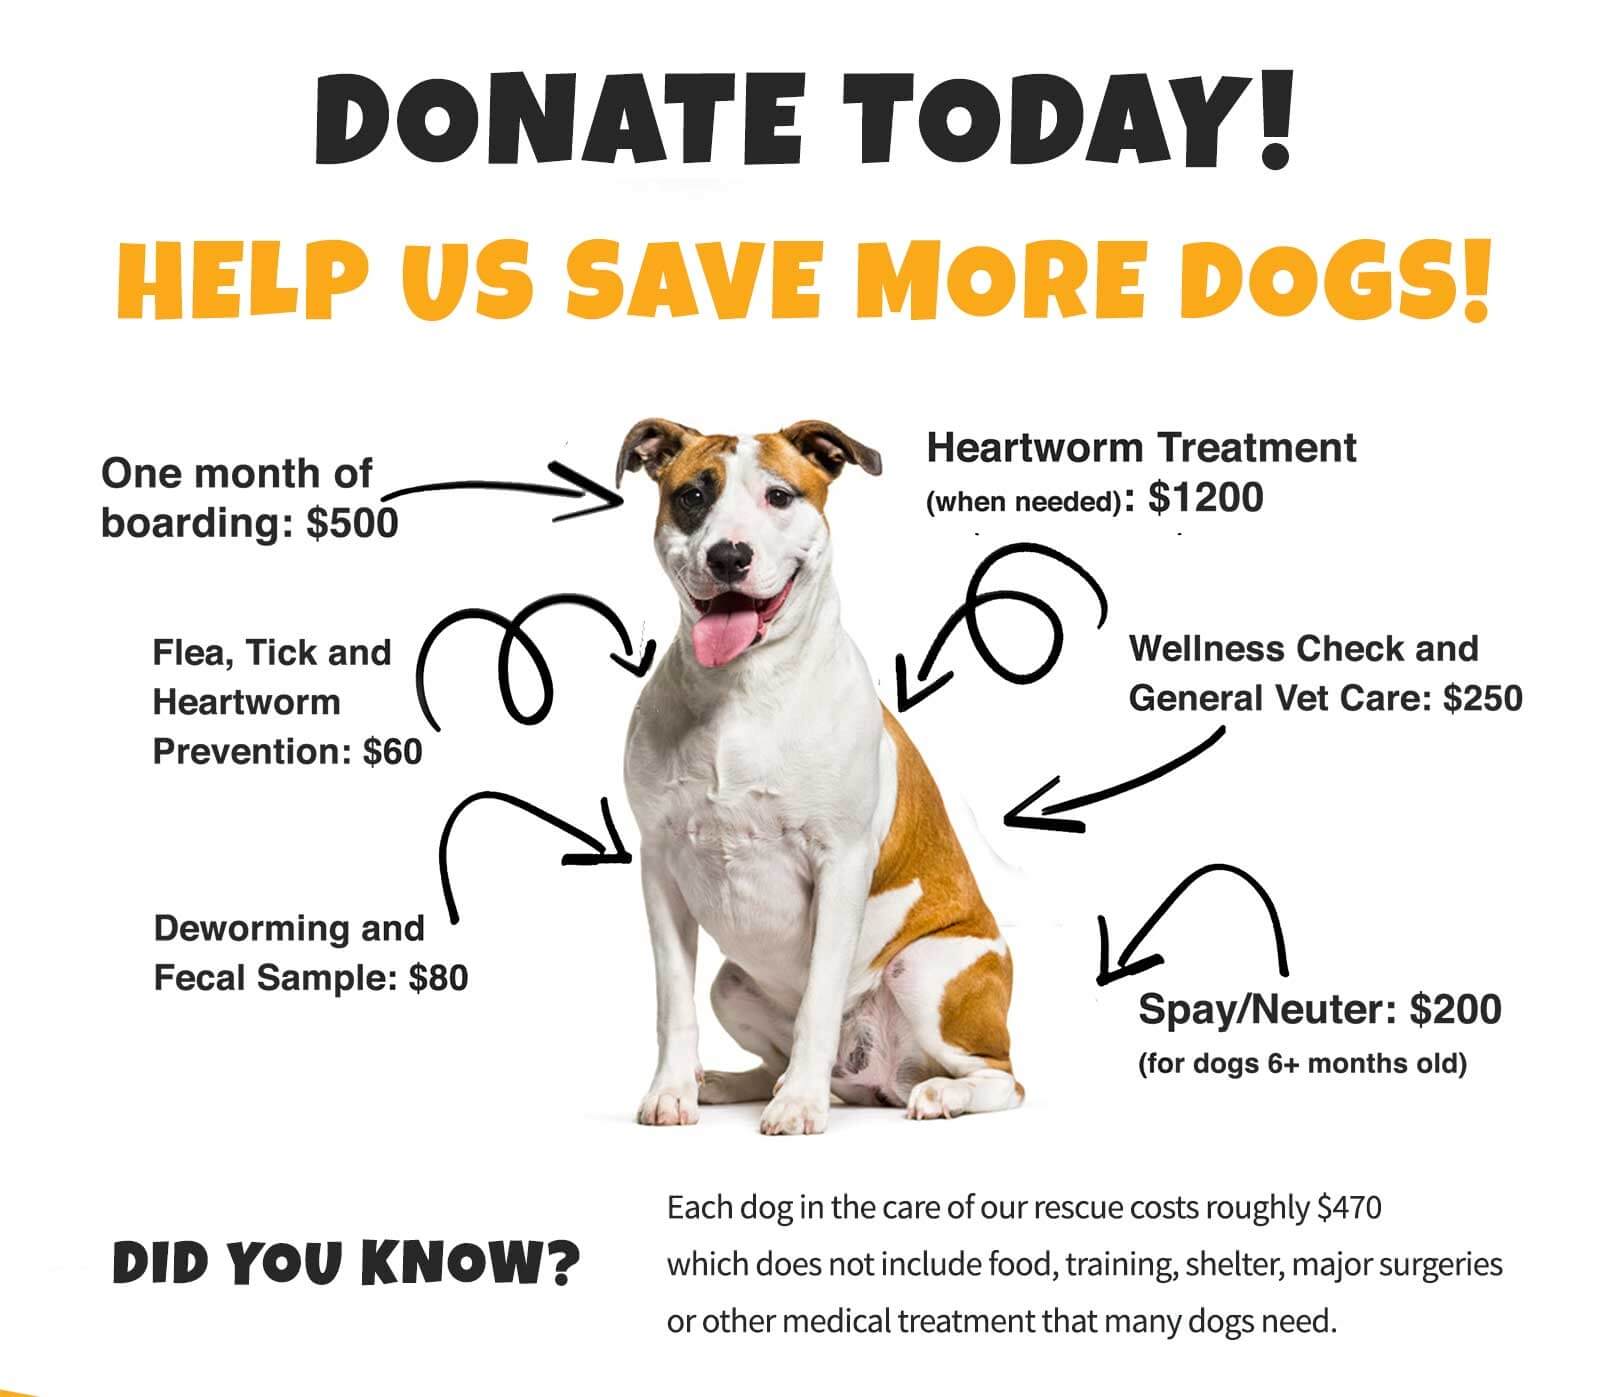 Why Donate to Paws Fur Recovery?